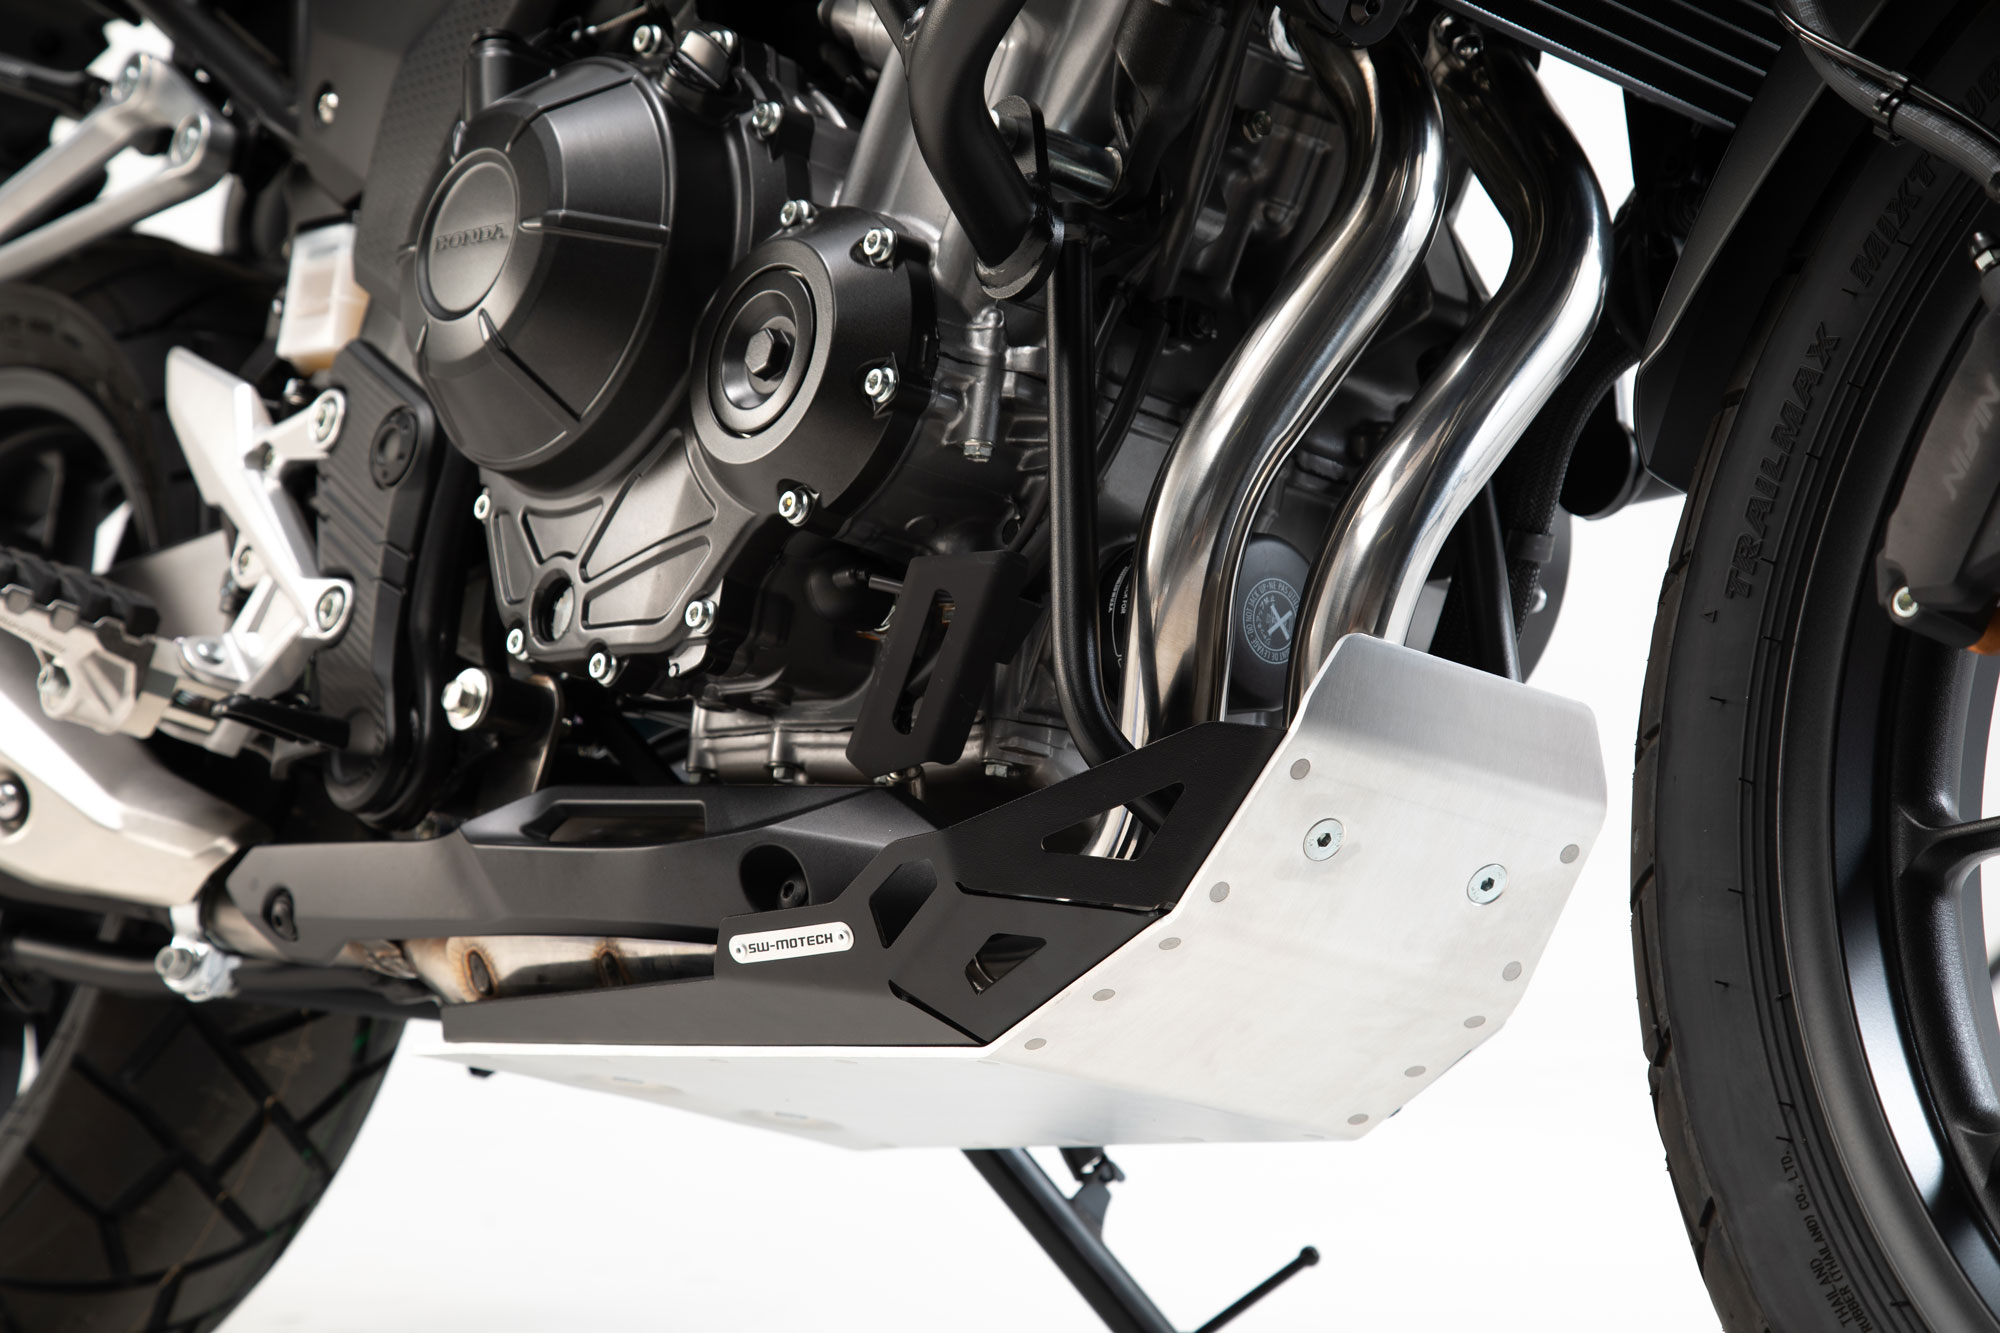 Accessories for the HONDA CB 500 X from SW-MOTECH